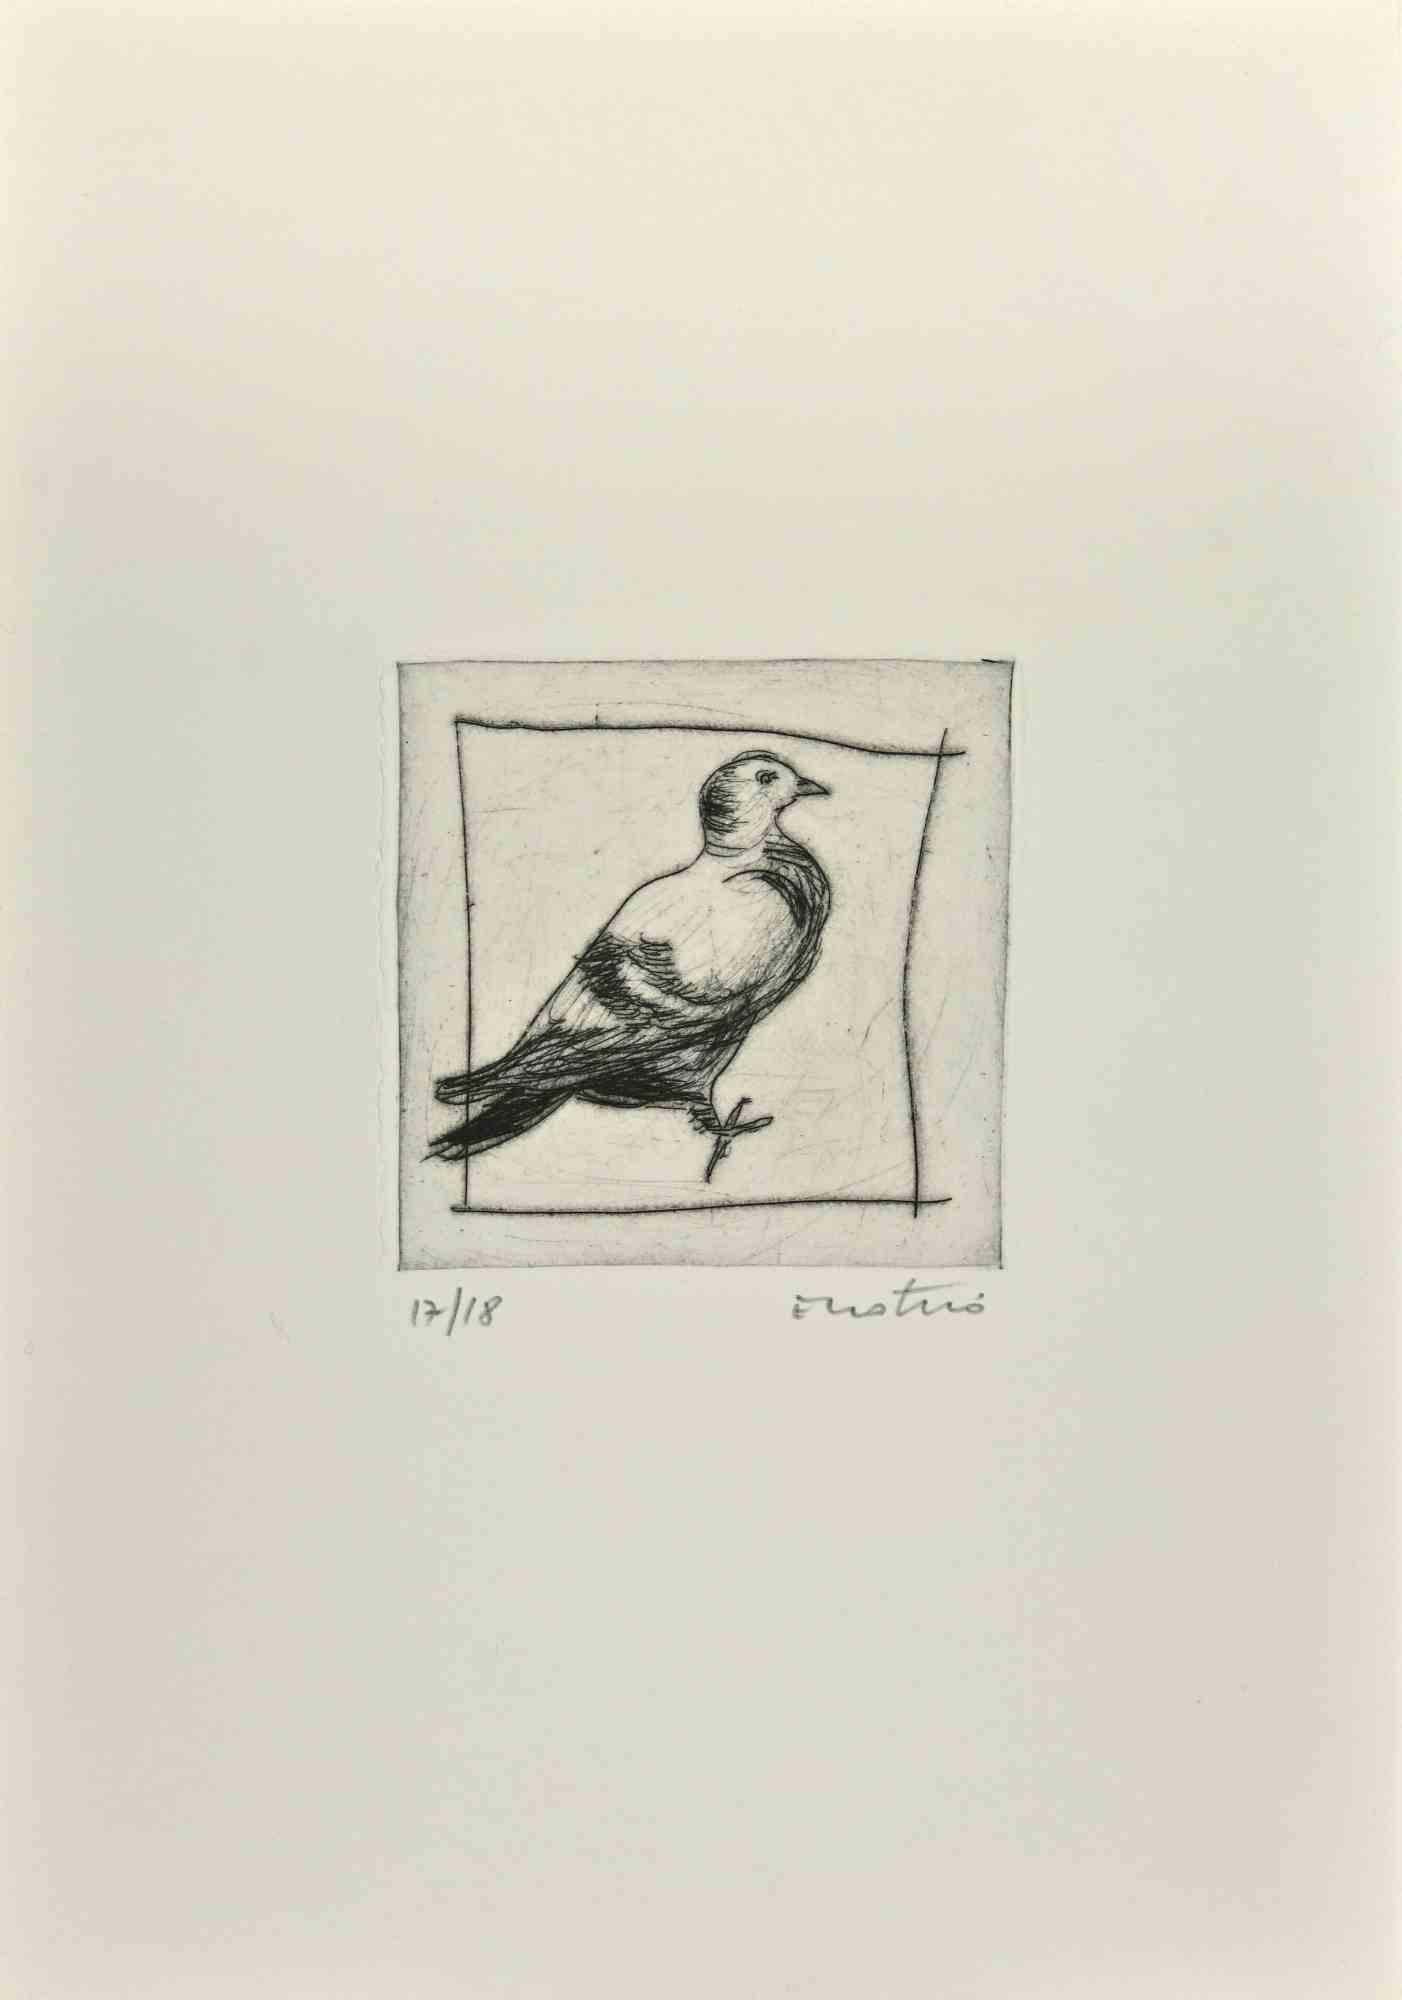 Pigeon is an Etching realized by Enotrio Pugliese in 1963.

Limited edition of 18 copies numbered and signed by the artist.

Good condition on a white cardboard.

Enotrio Pugliese (May 11, 1920 - August 1989) was an Italian painter. Born in Buenos